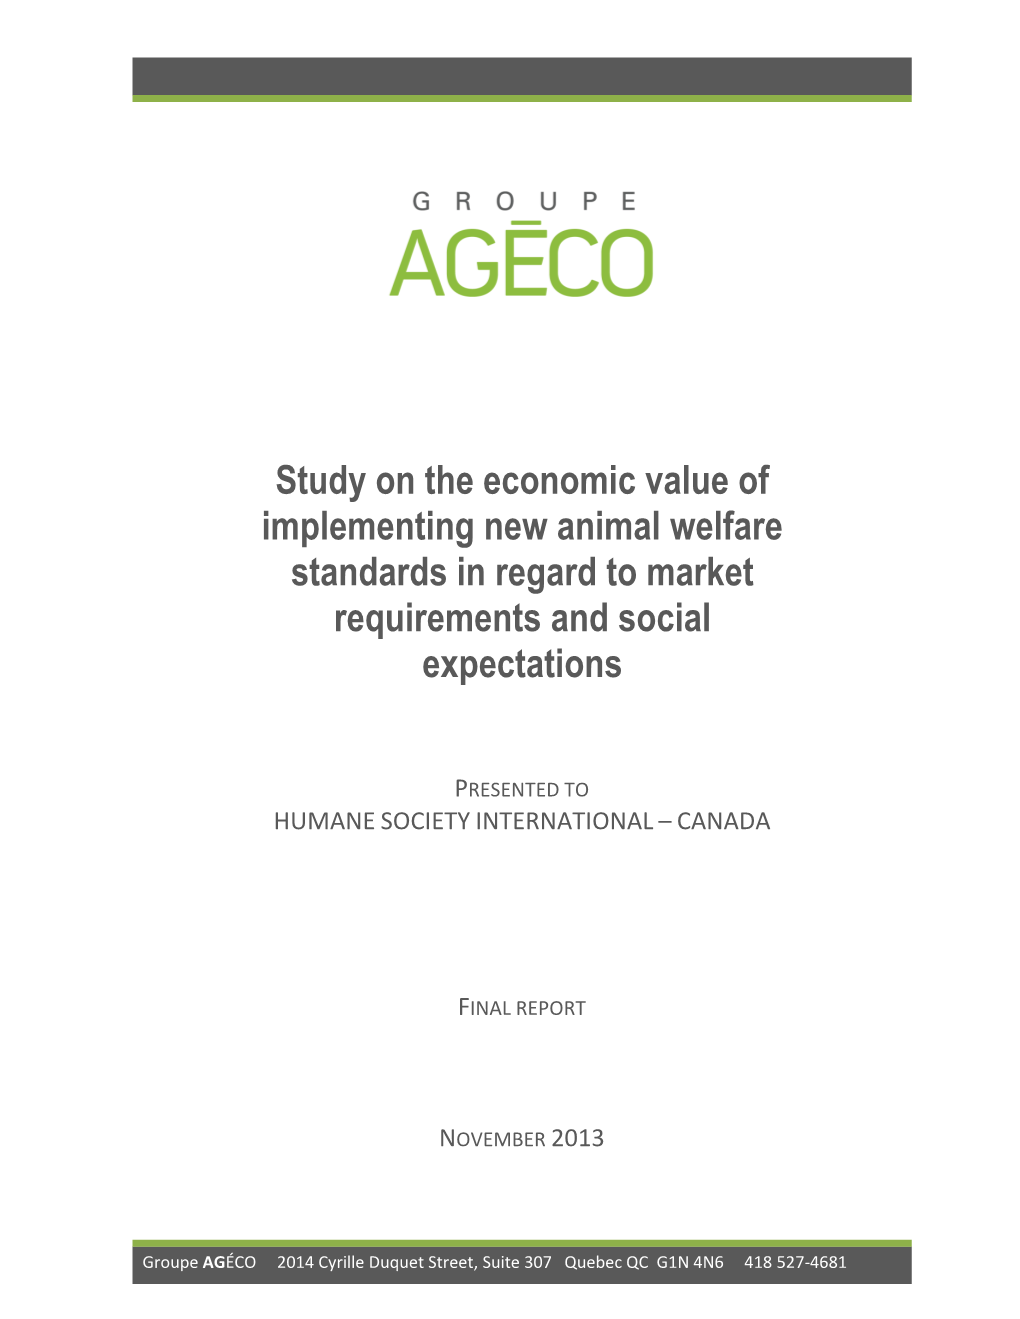 Study on the Economic Value of Implementing New Animal Welfare Standards in Regard to Market Requirements and Social Expectation